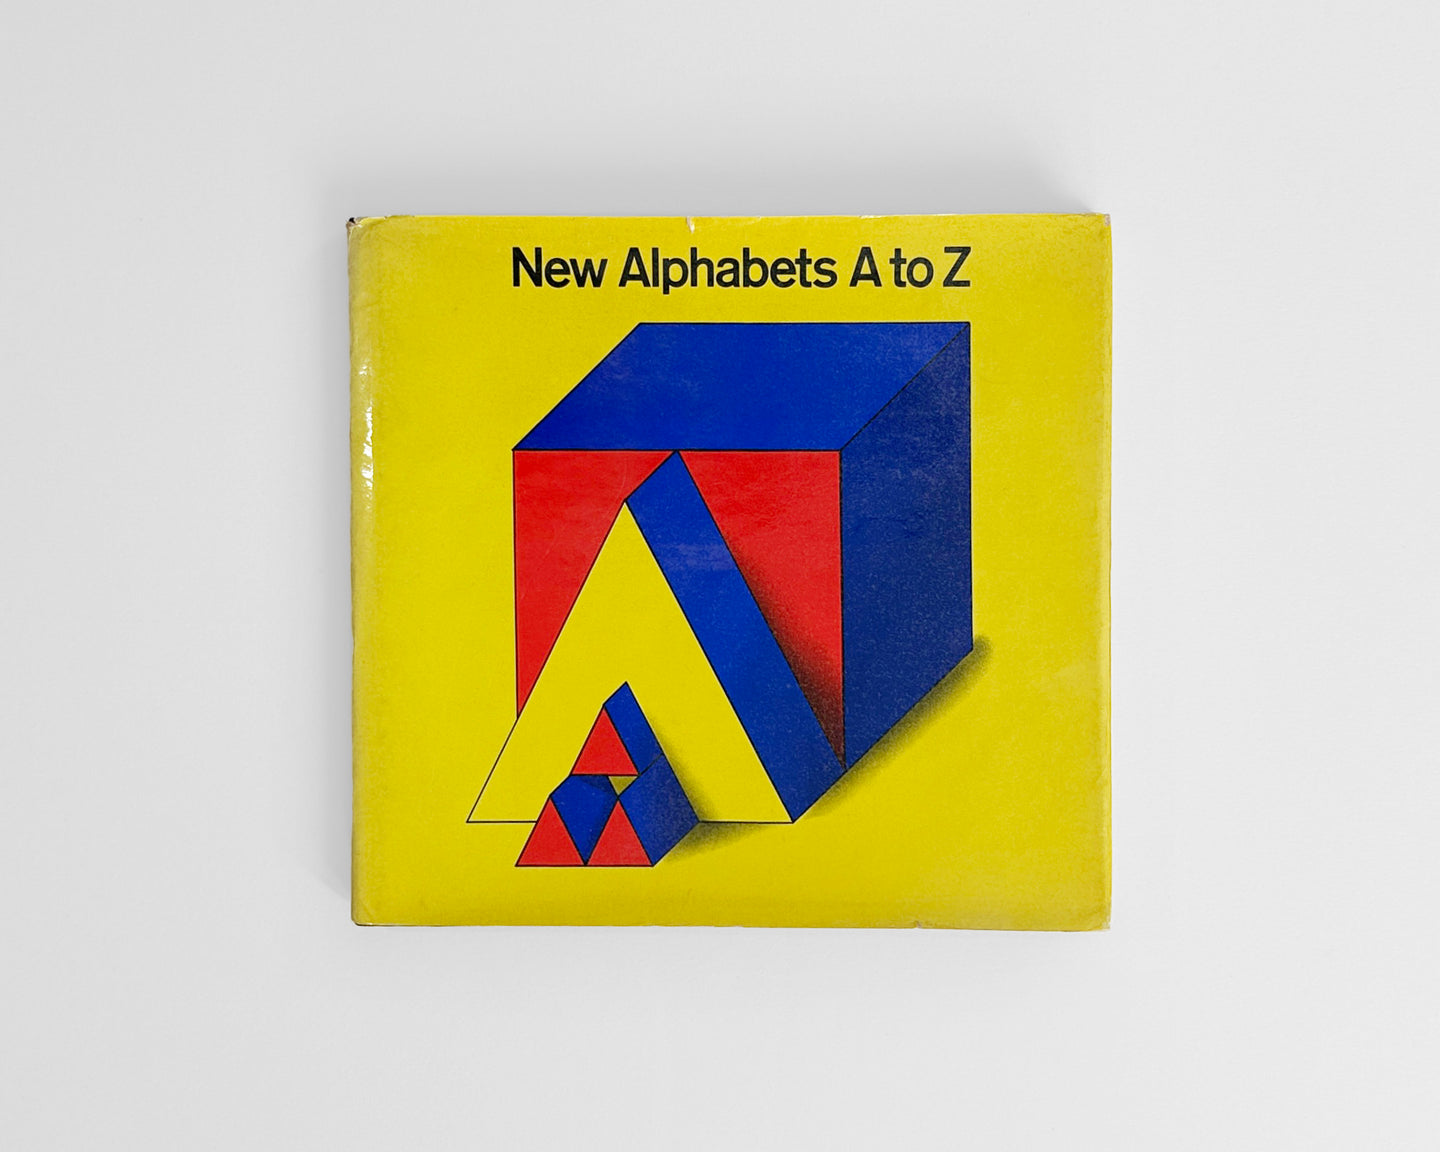 New Alphabets A to Z [Herbert Spencer and Colin Forbes]